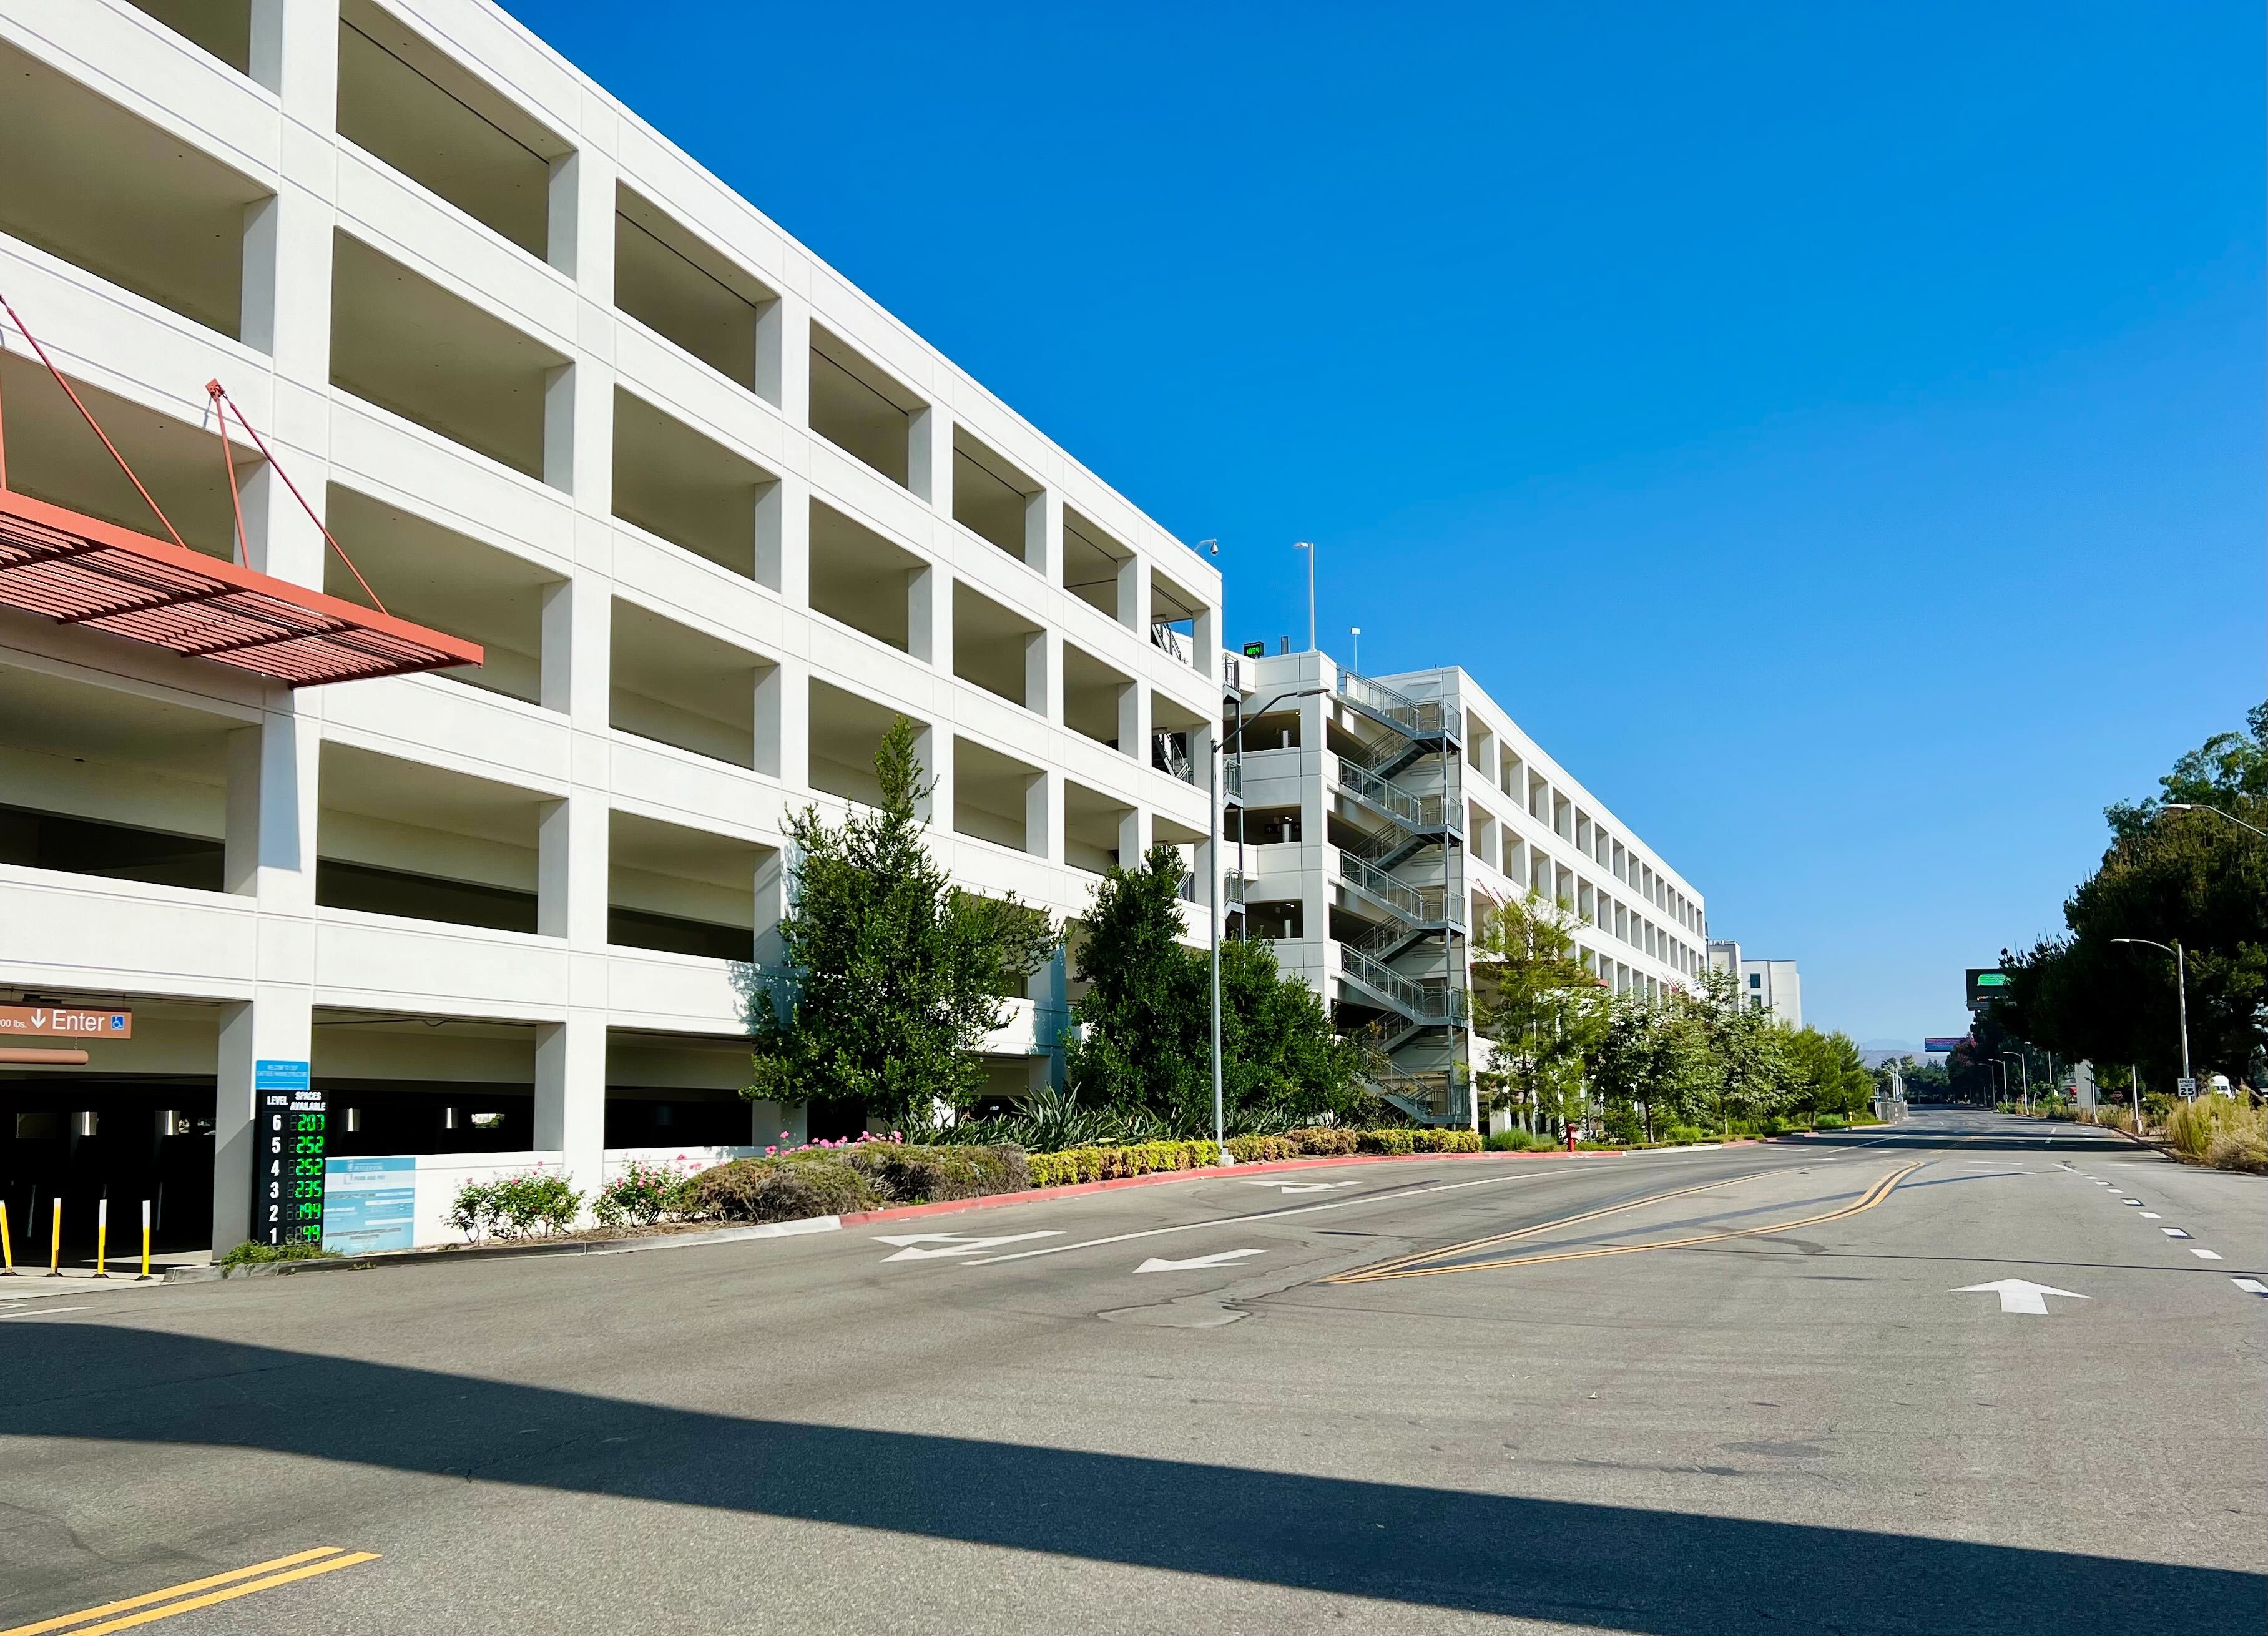 Two parking structures with entrance shown